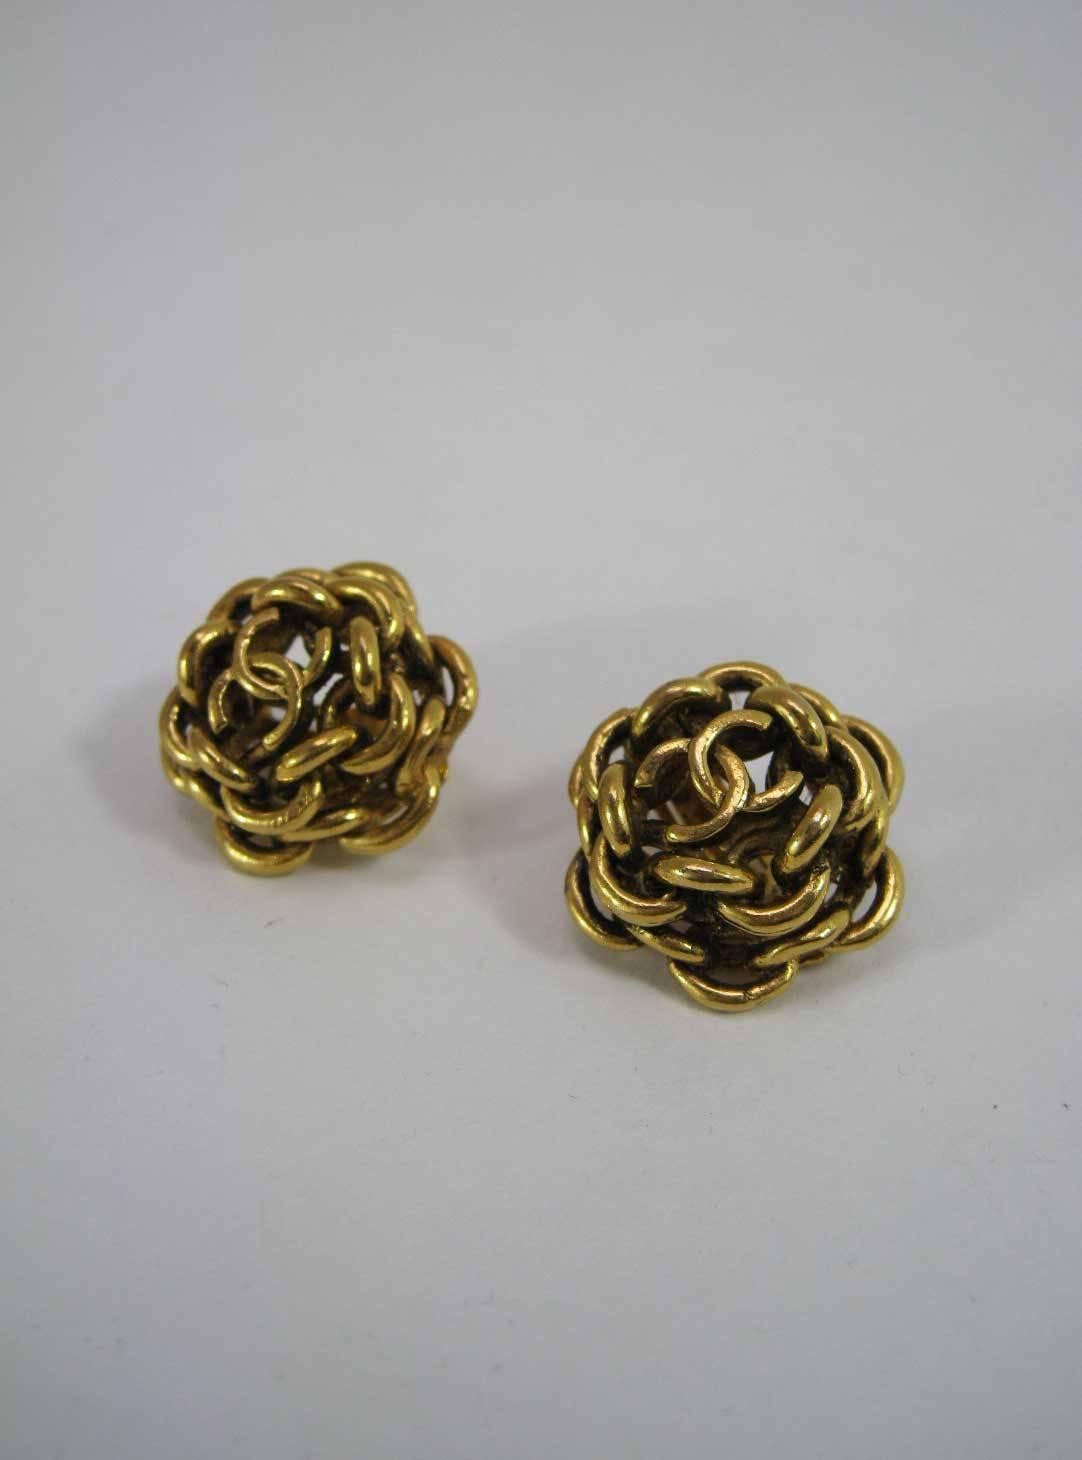 1980's Chanel gold tone interlocking CC earrings.

Round rows of interlocking chain with CC on top.

Clip-on style. 

Stamped 222 Chanel on back.

This item is in excellent pre-owned vintage condition with minimal wear to metal.

MEASUREMENTS:
1